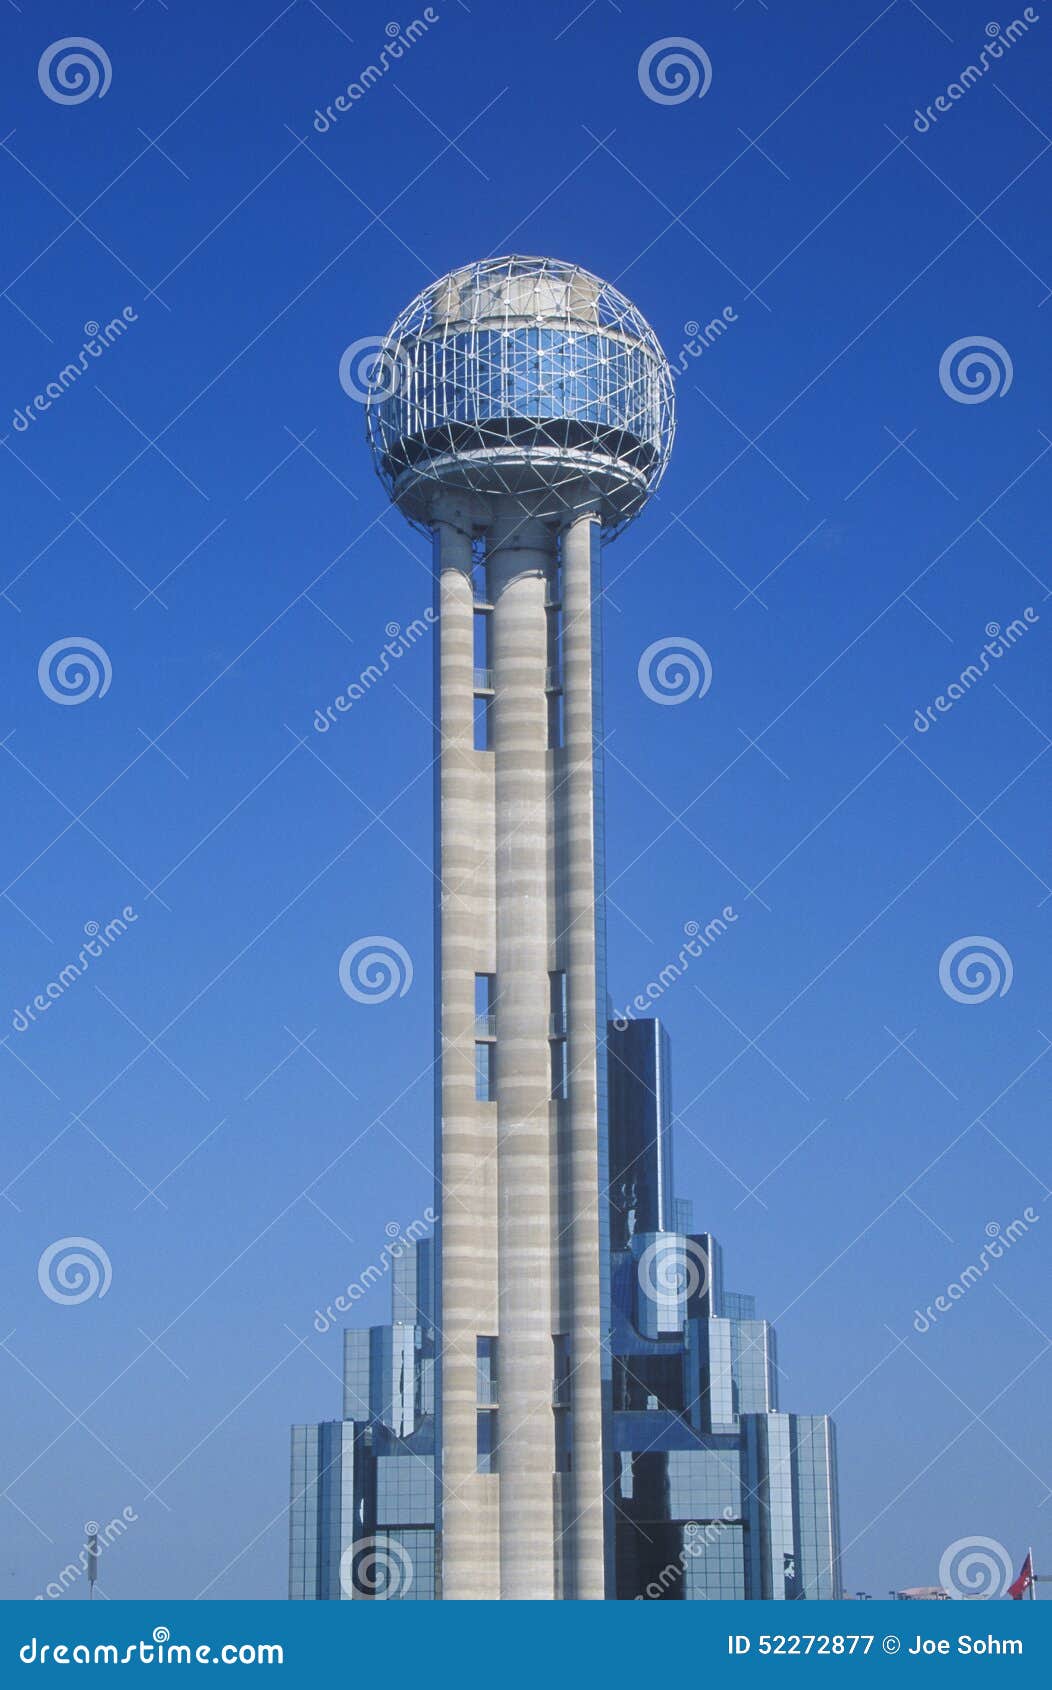 detail of reunion tower in dallas, tx